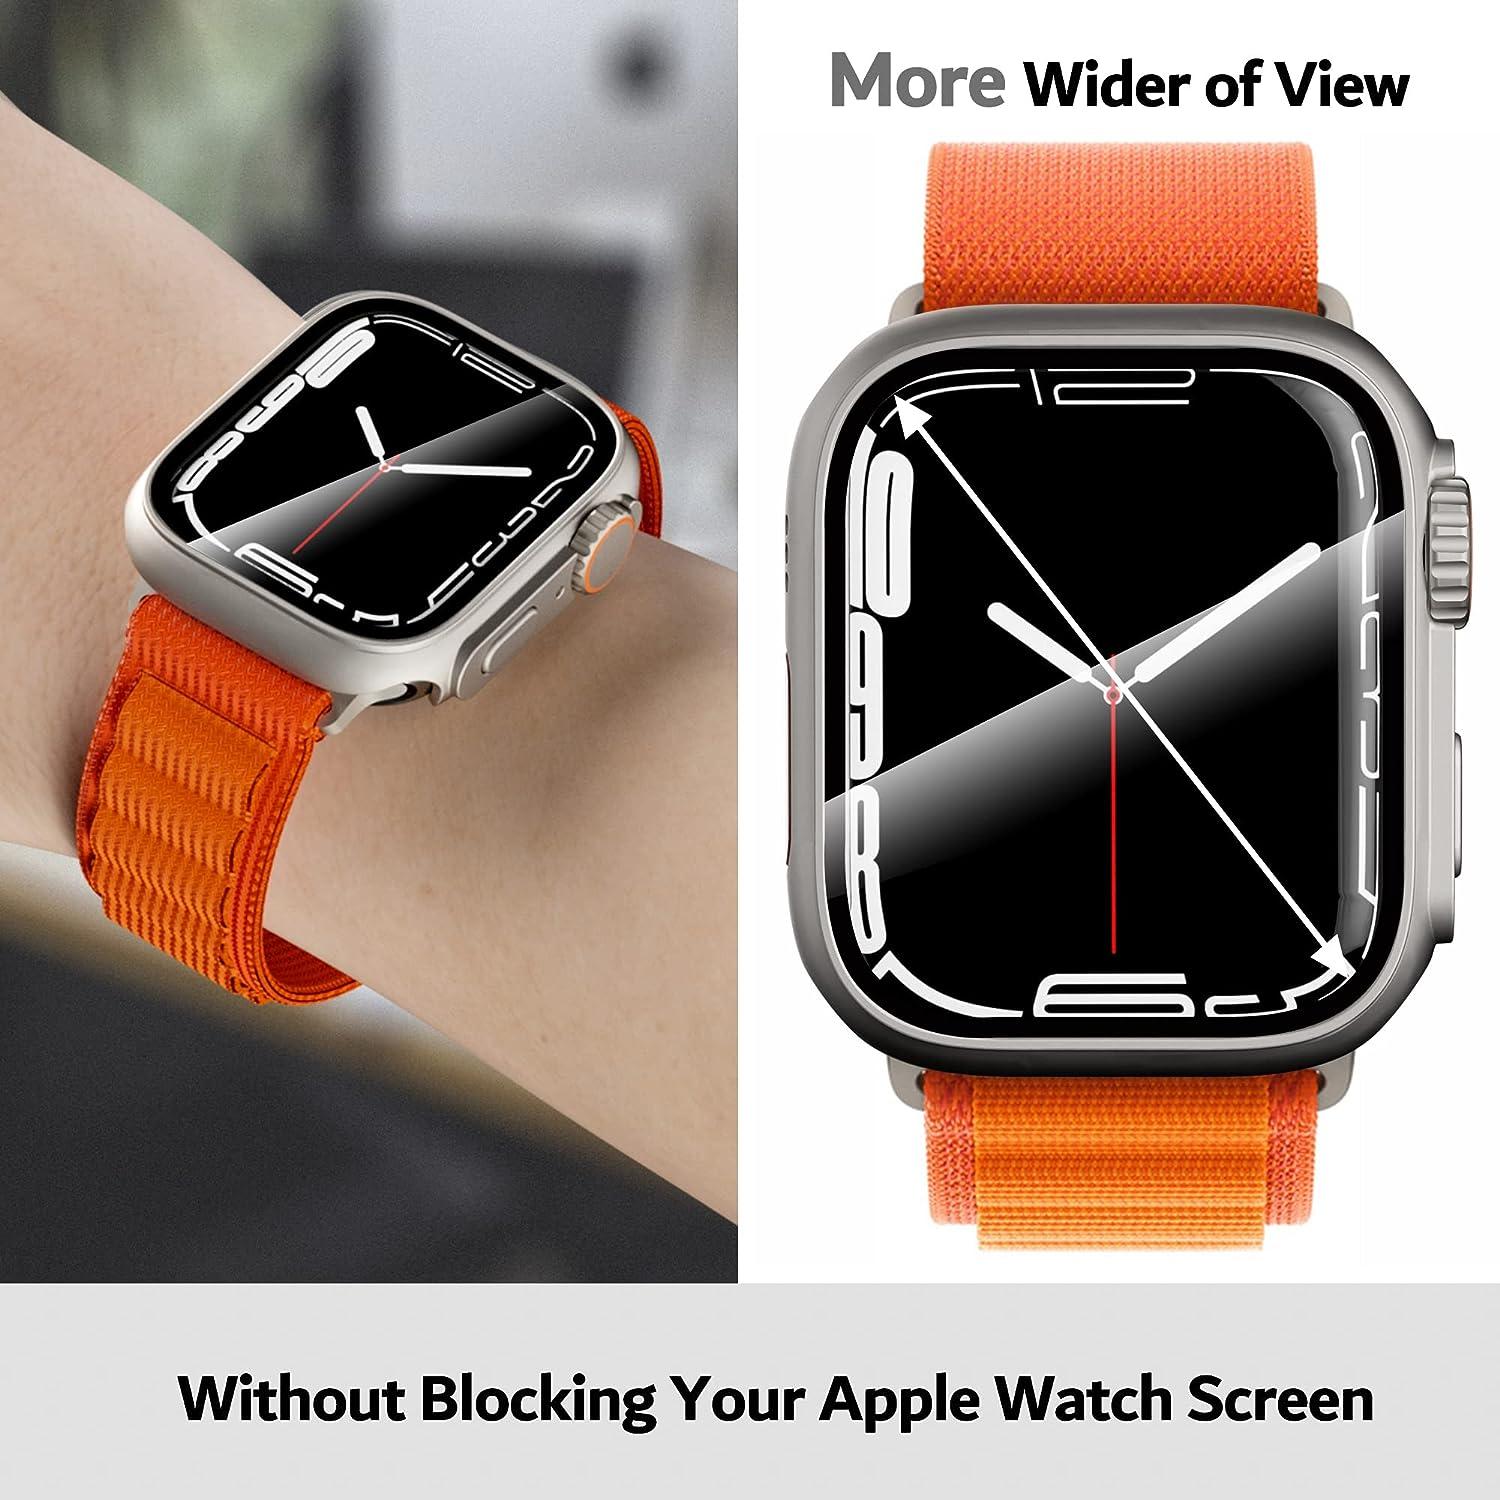 Apple Watch Series 7 Compatibility